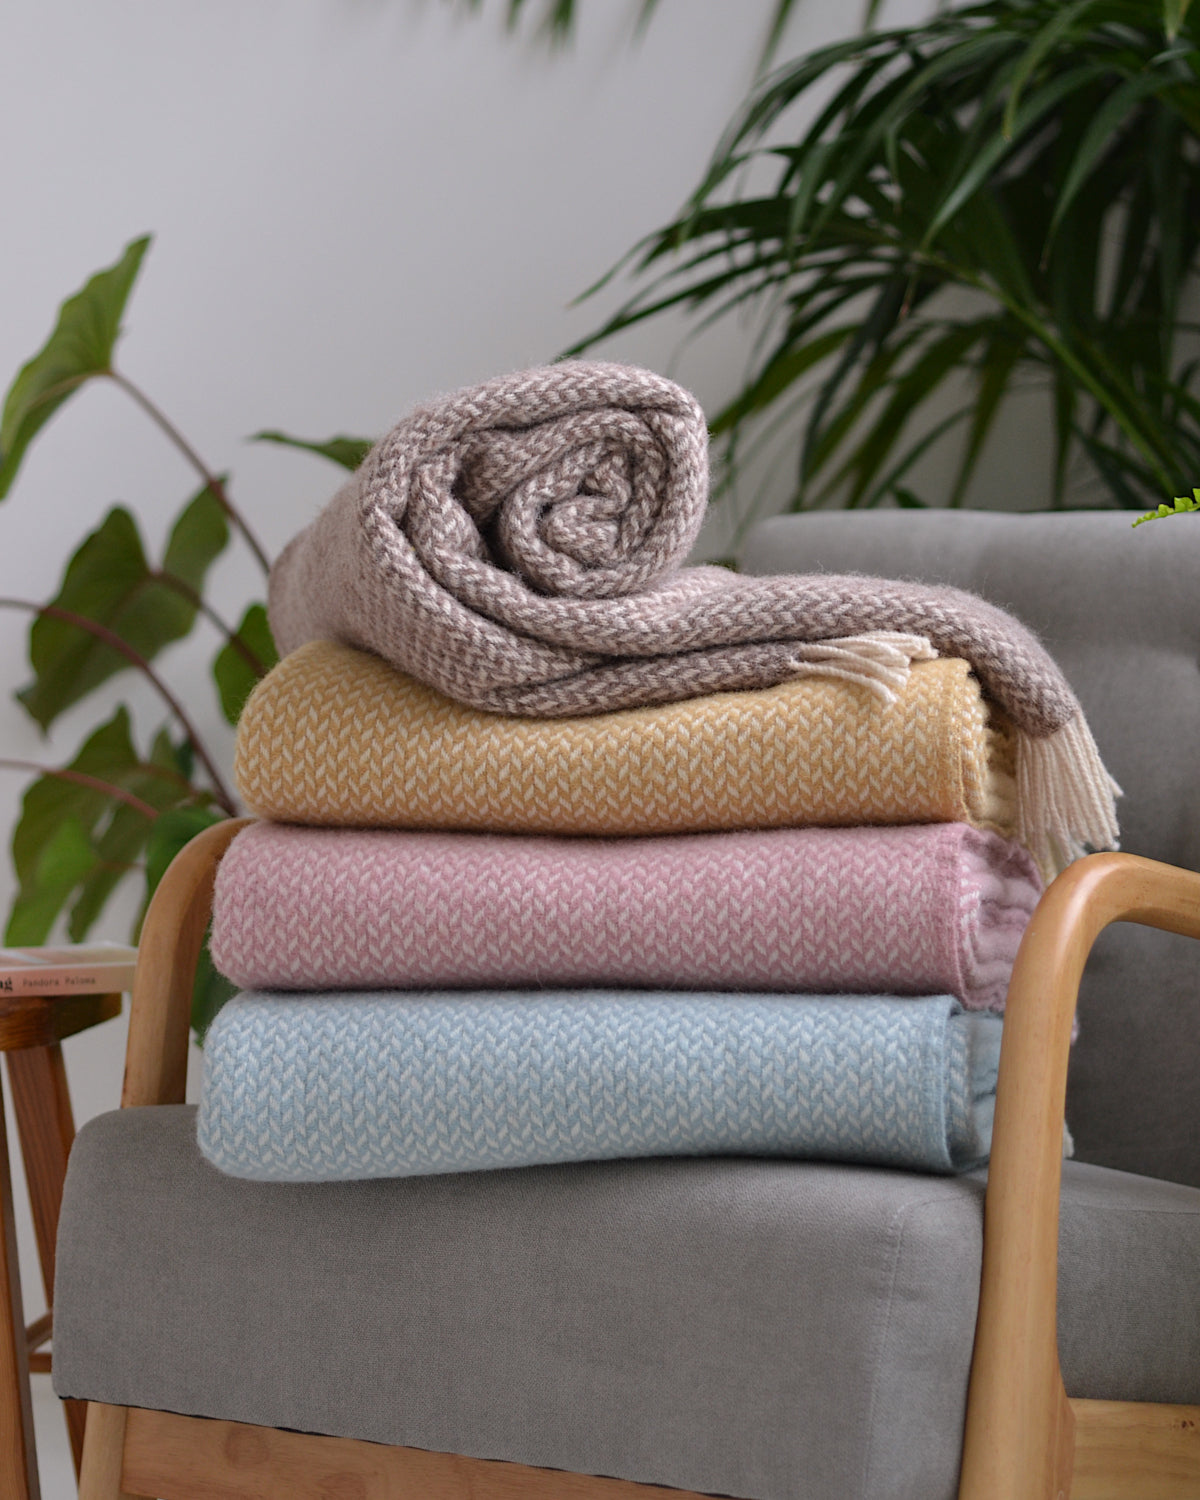 A stack of folded wool throws on a lounge chair